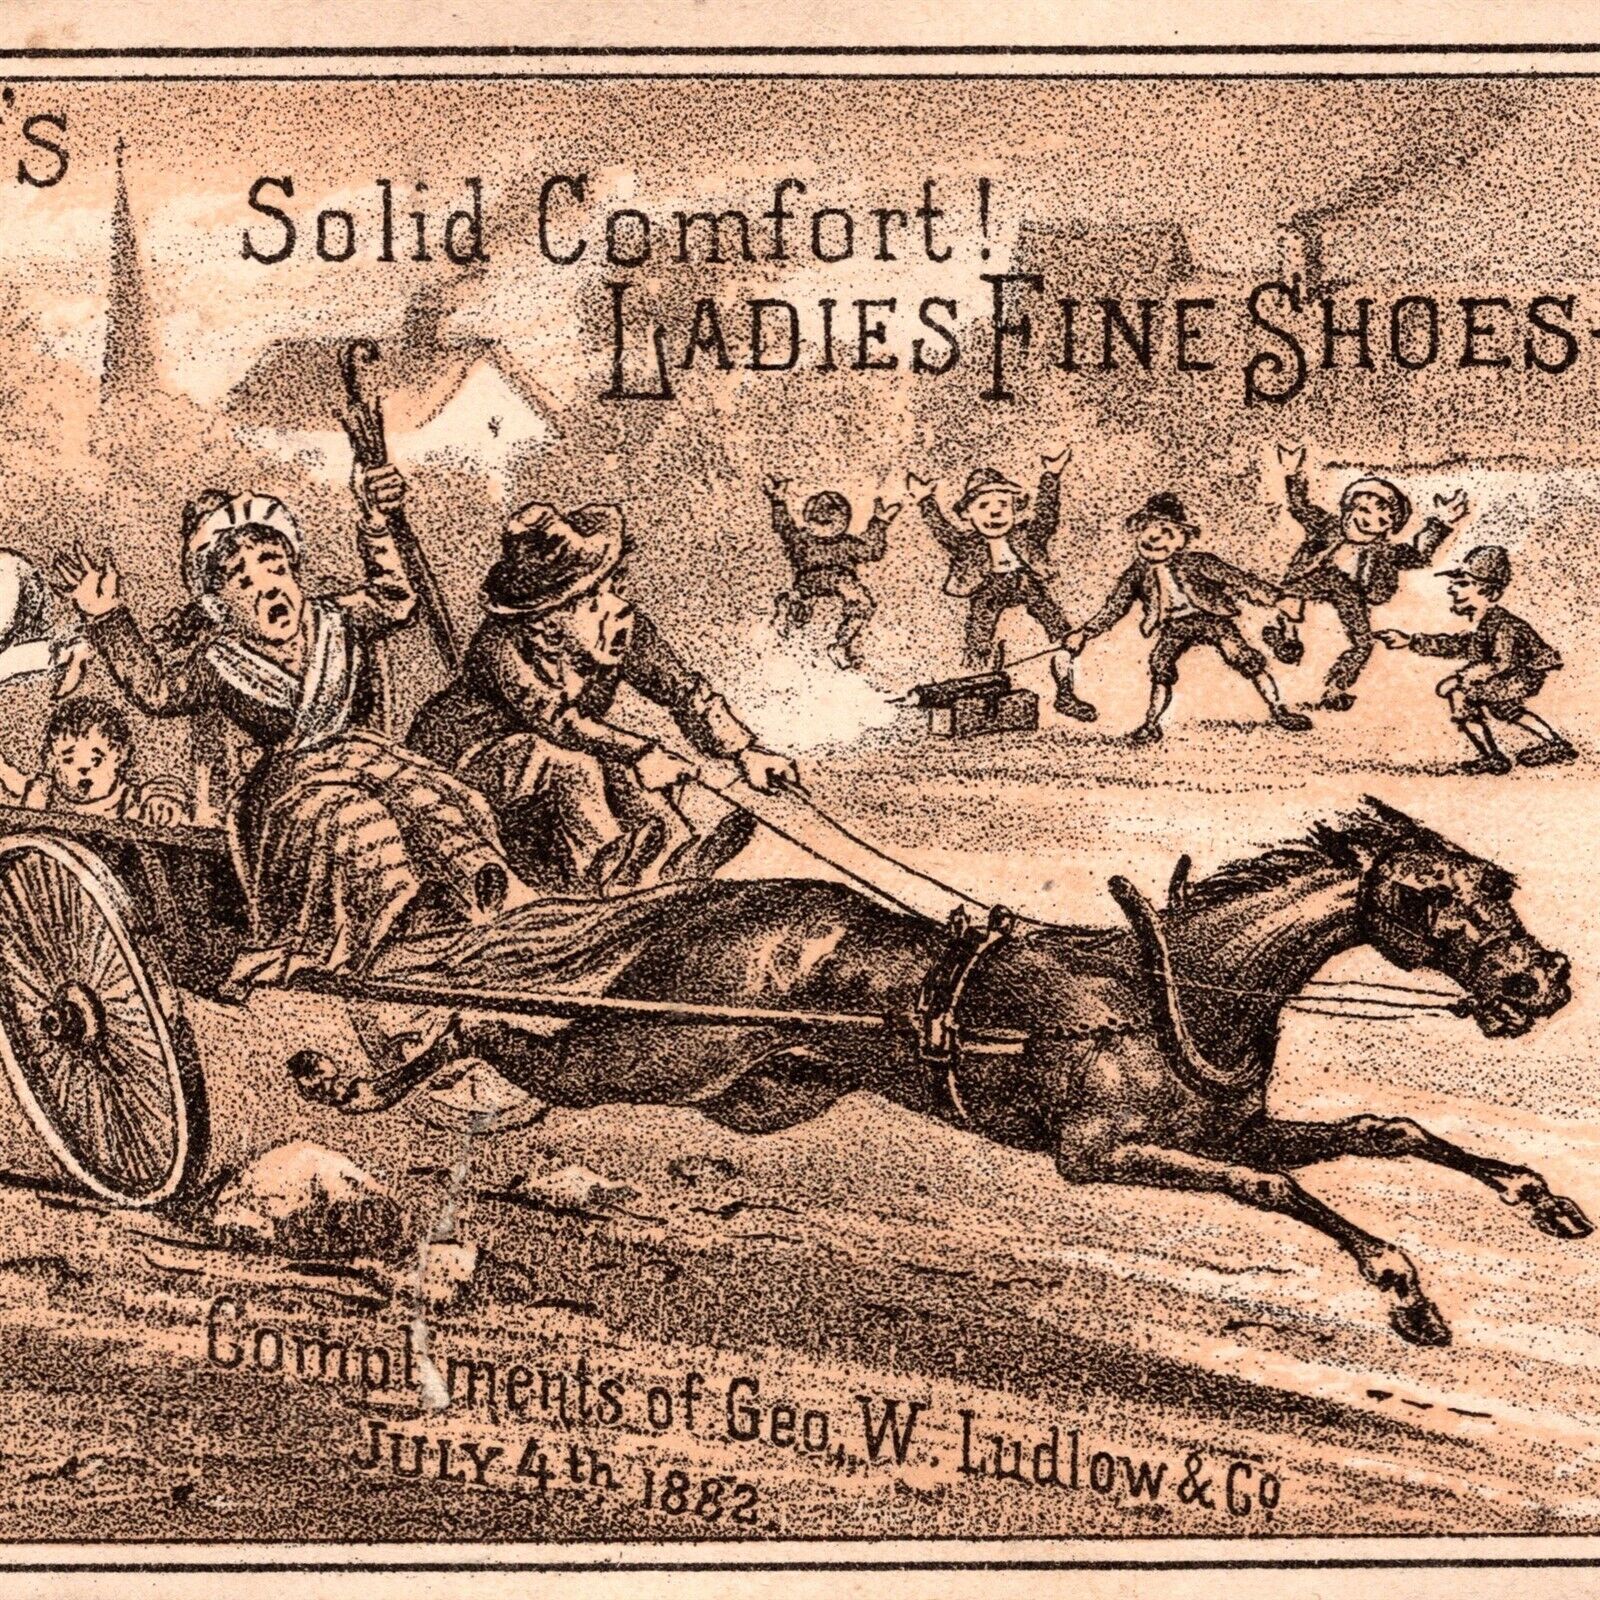 1882 George Ludlow's Ladies Fine Shoes Runaway Horse Wagon Victorian Trade Card